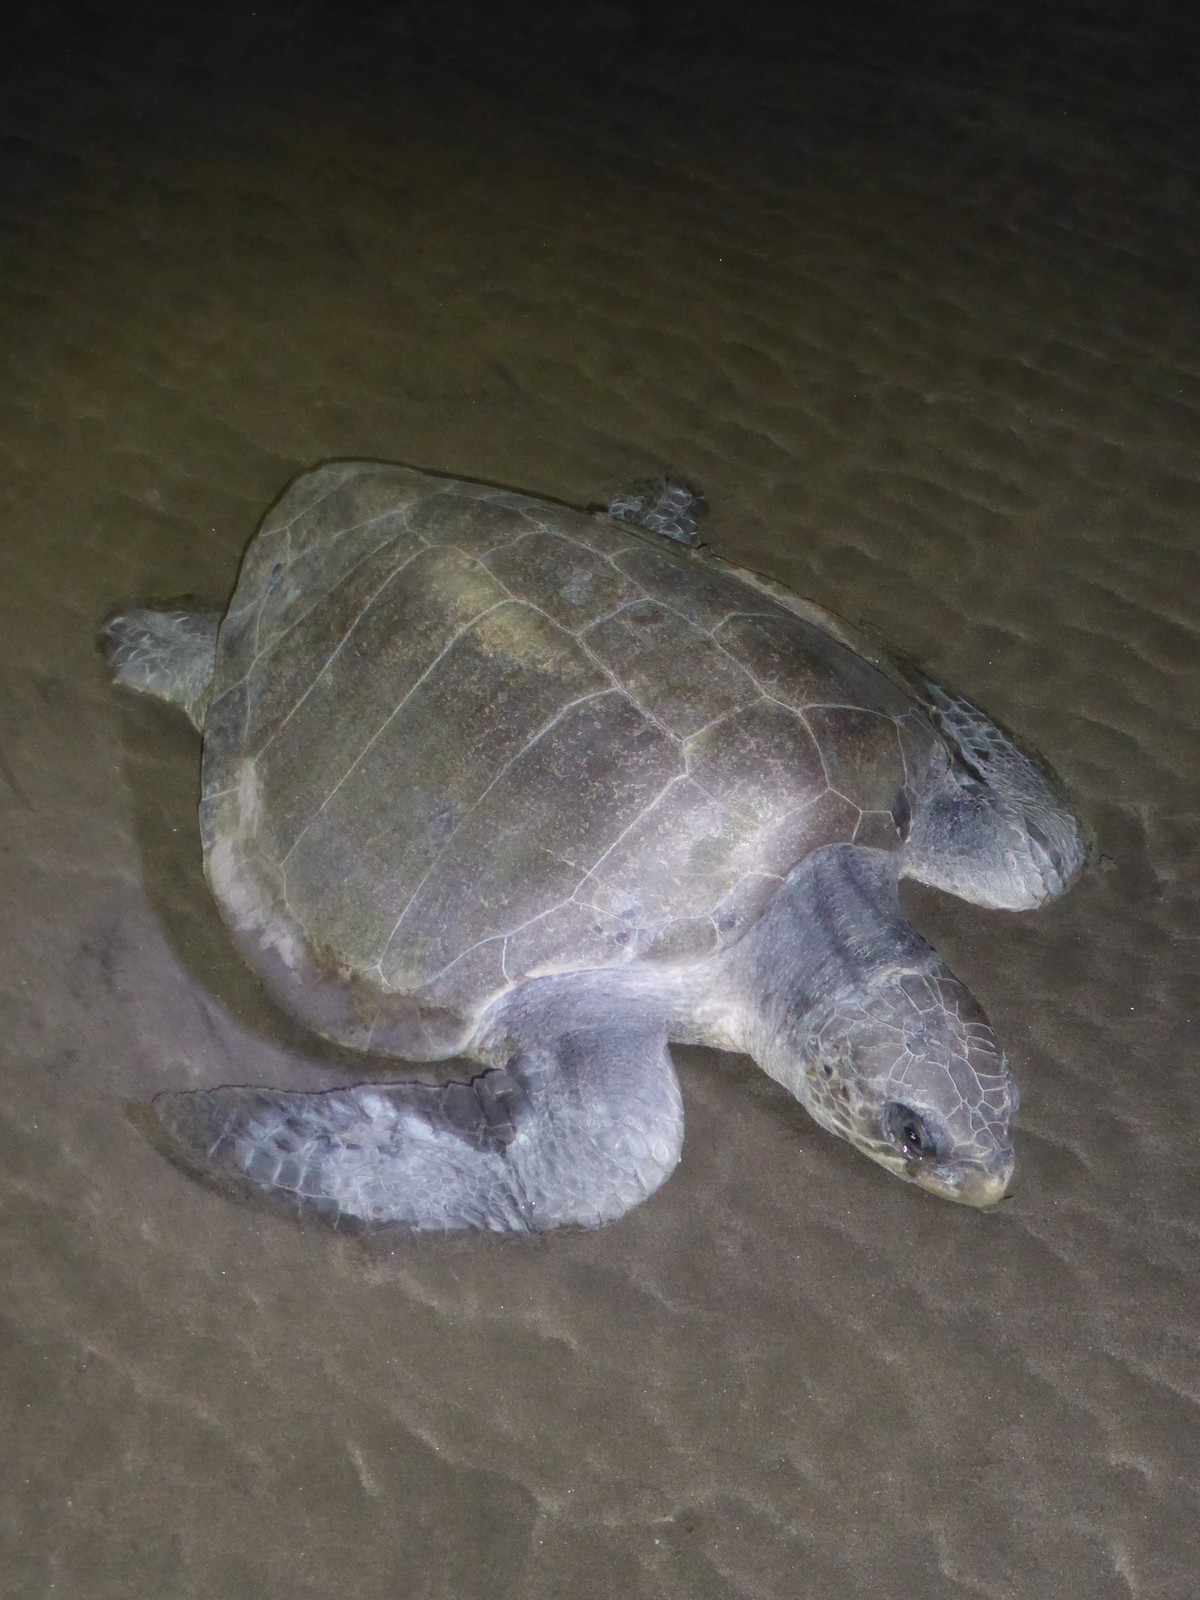 The turtle who visited us one night